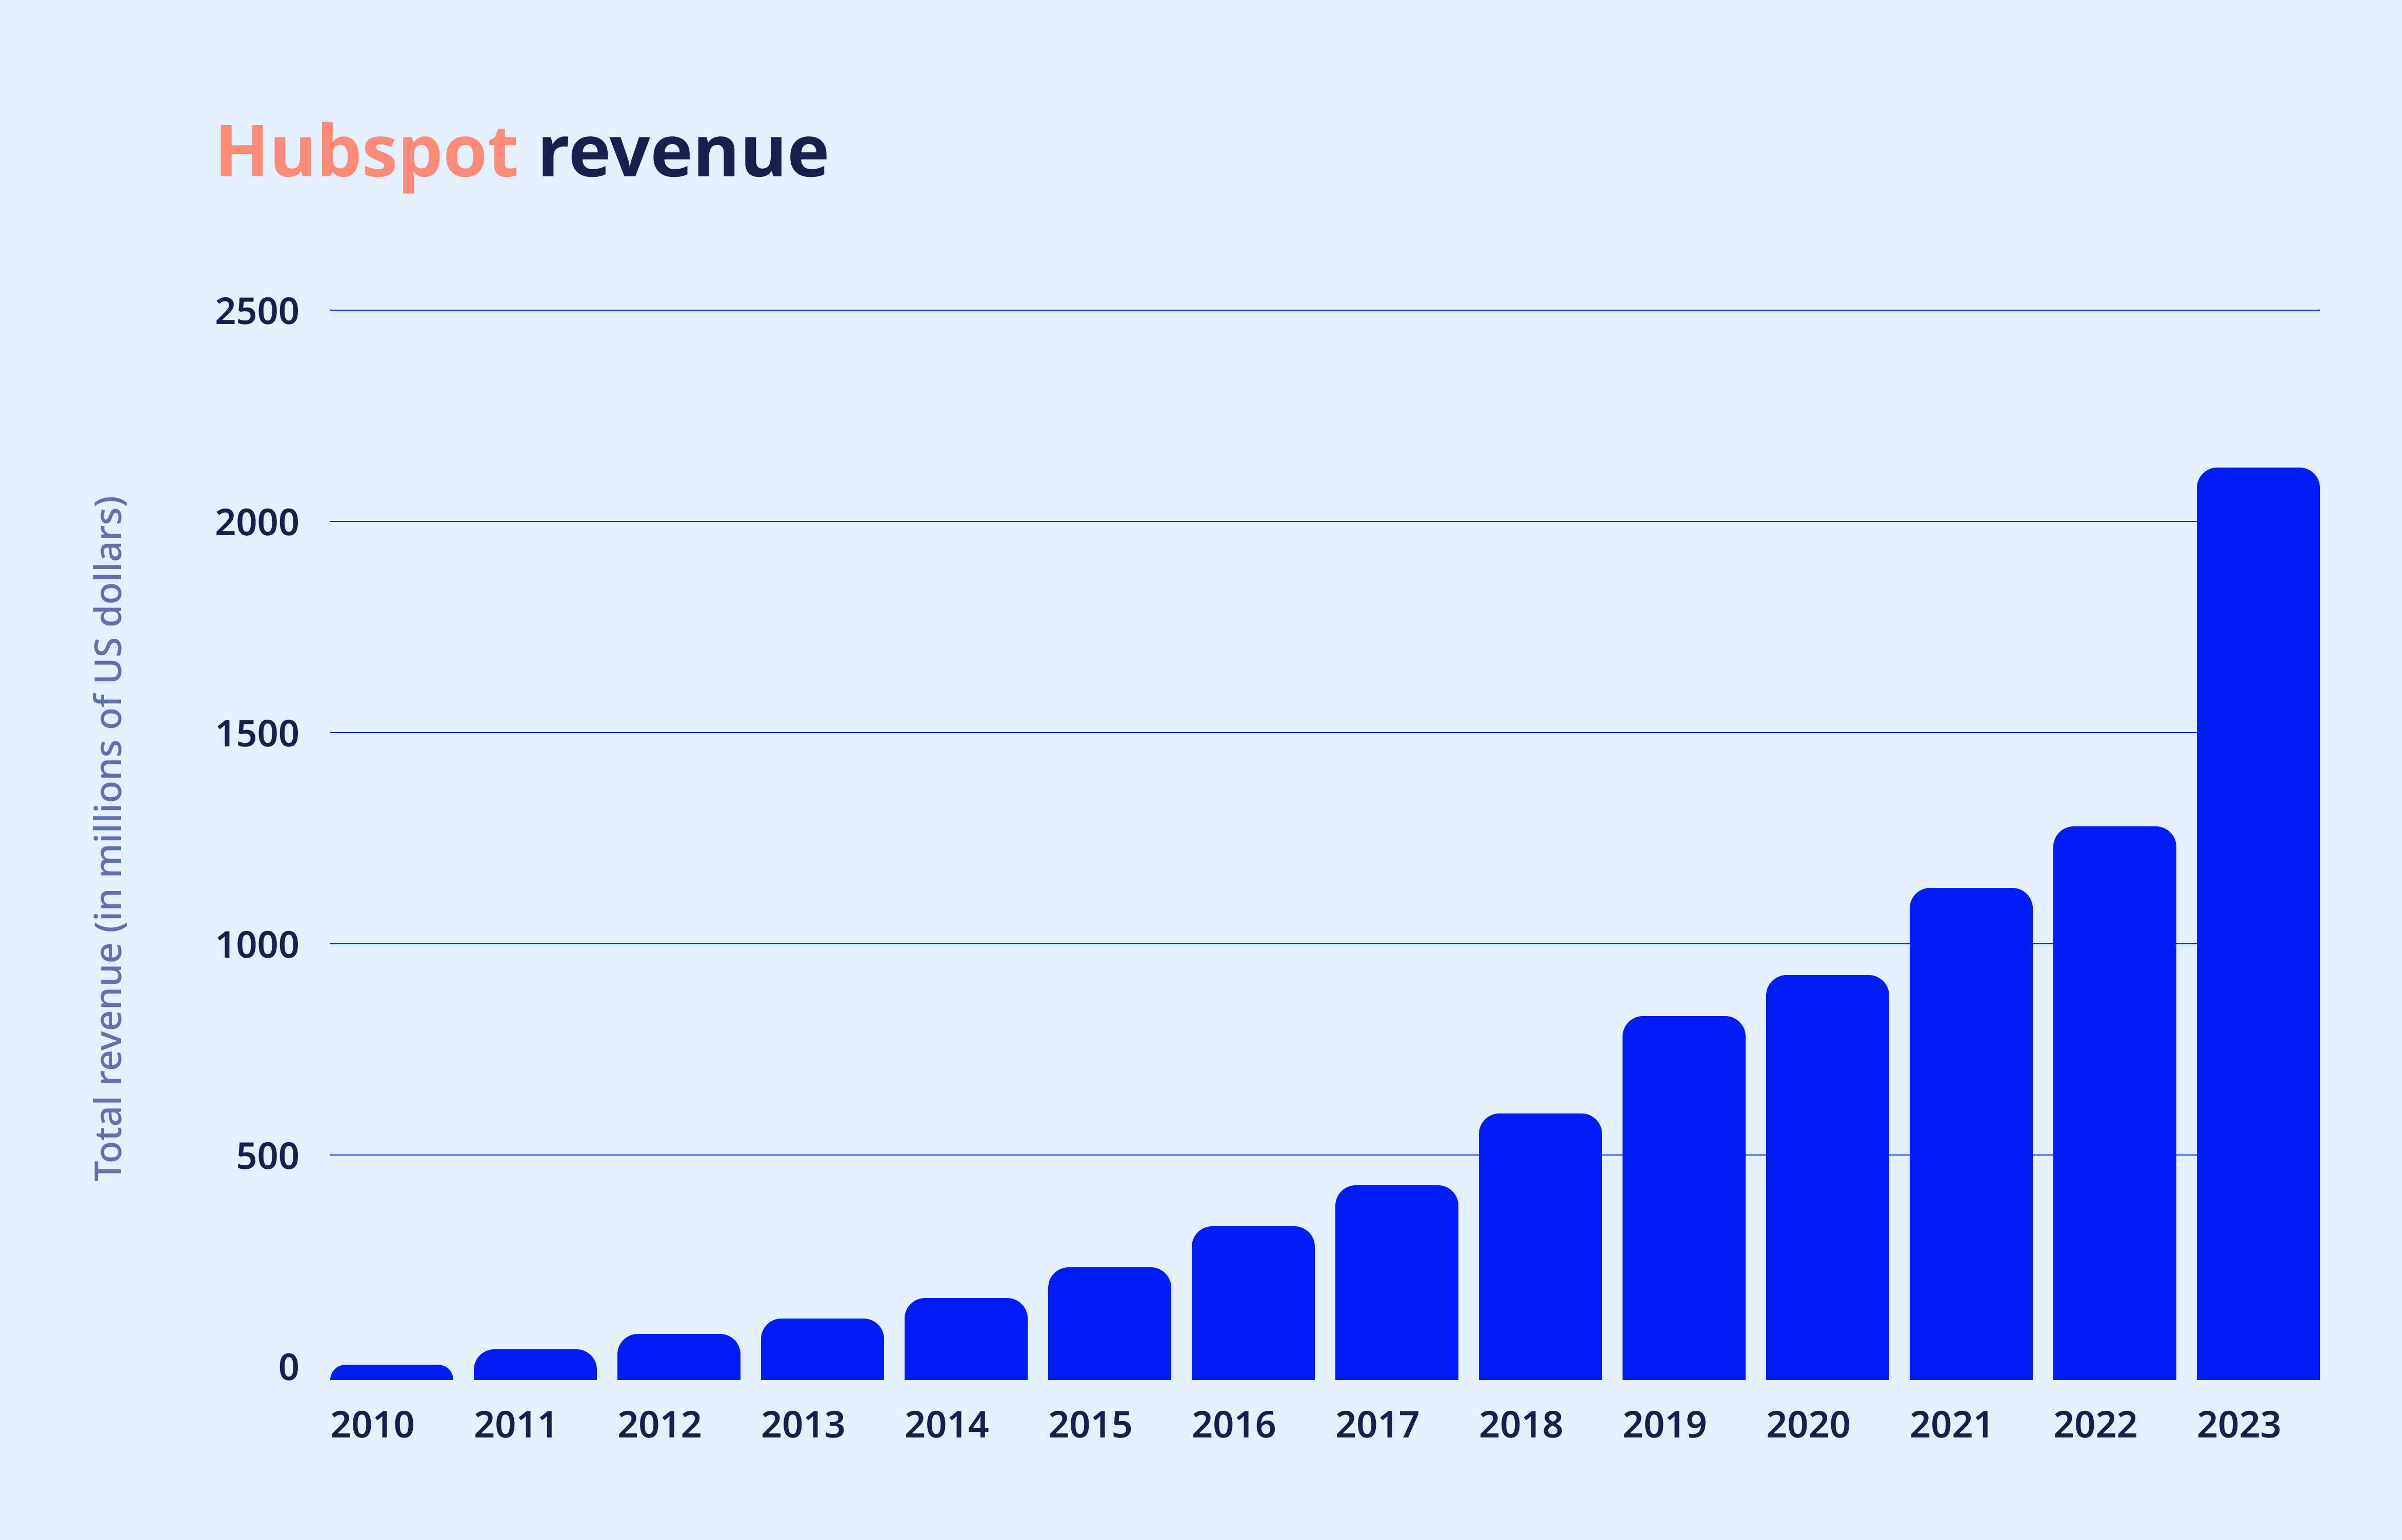 Hubspot Revenue growth over the last 15 years